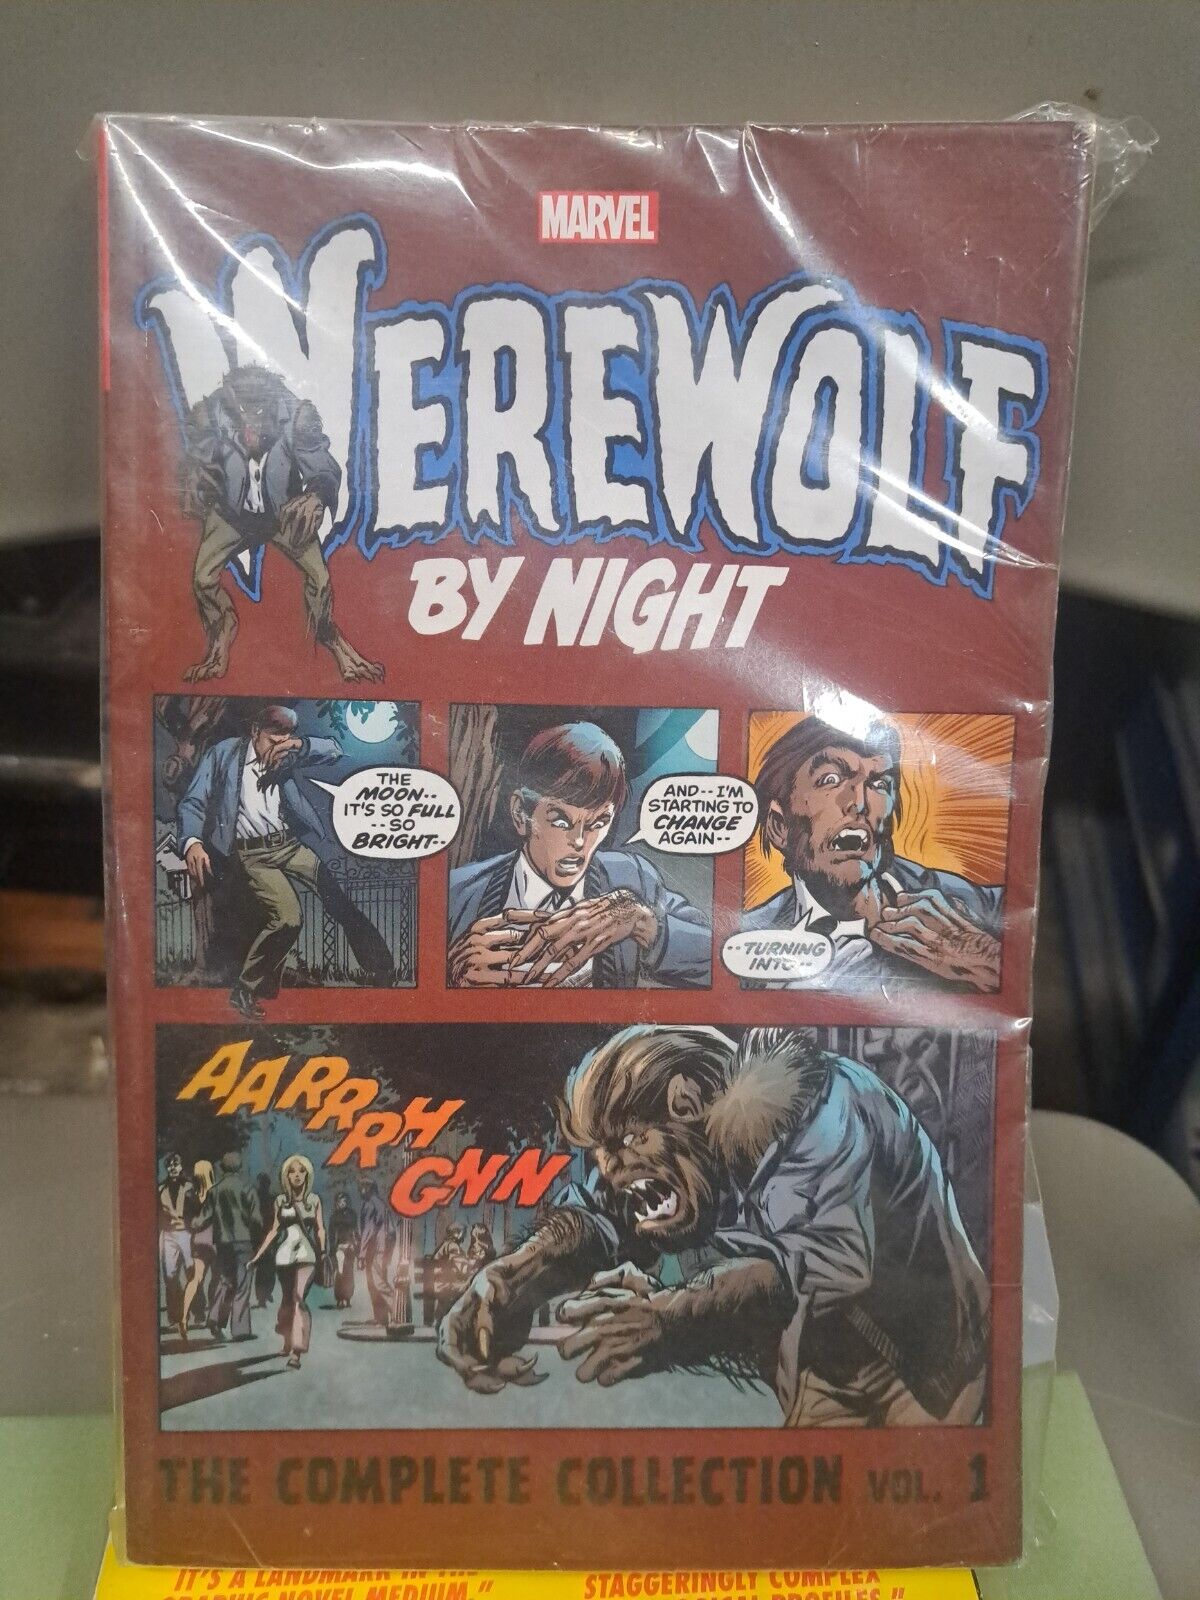 Werewolf by Night The Complete Collection #1. Marvel 2017 1st Edition 1st Print.